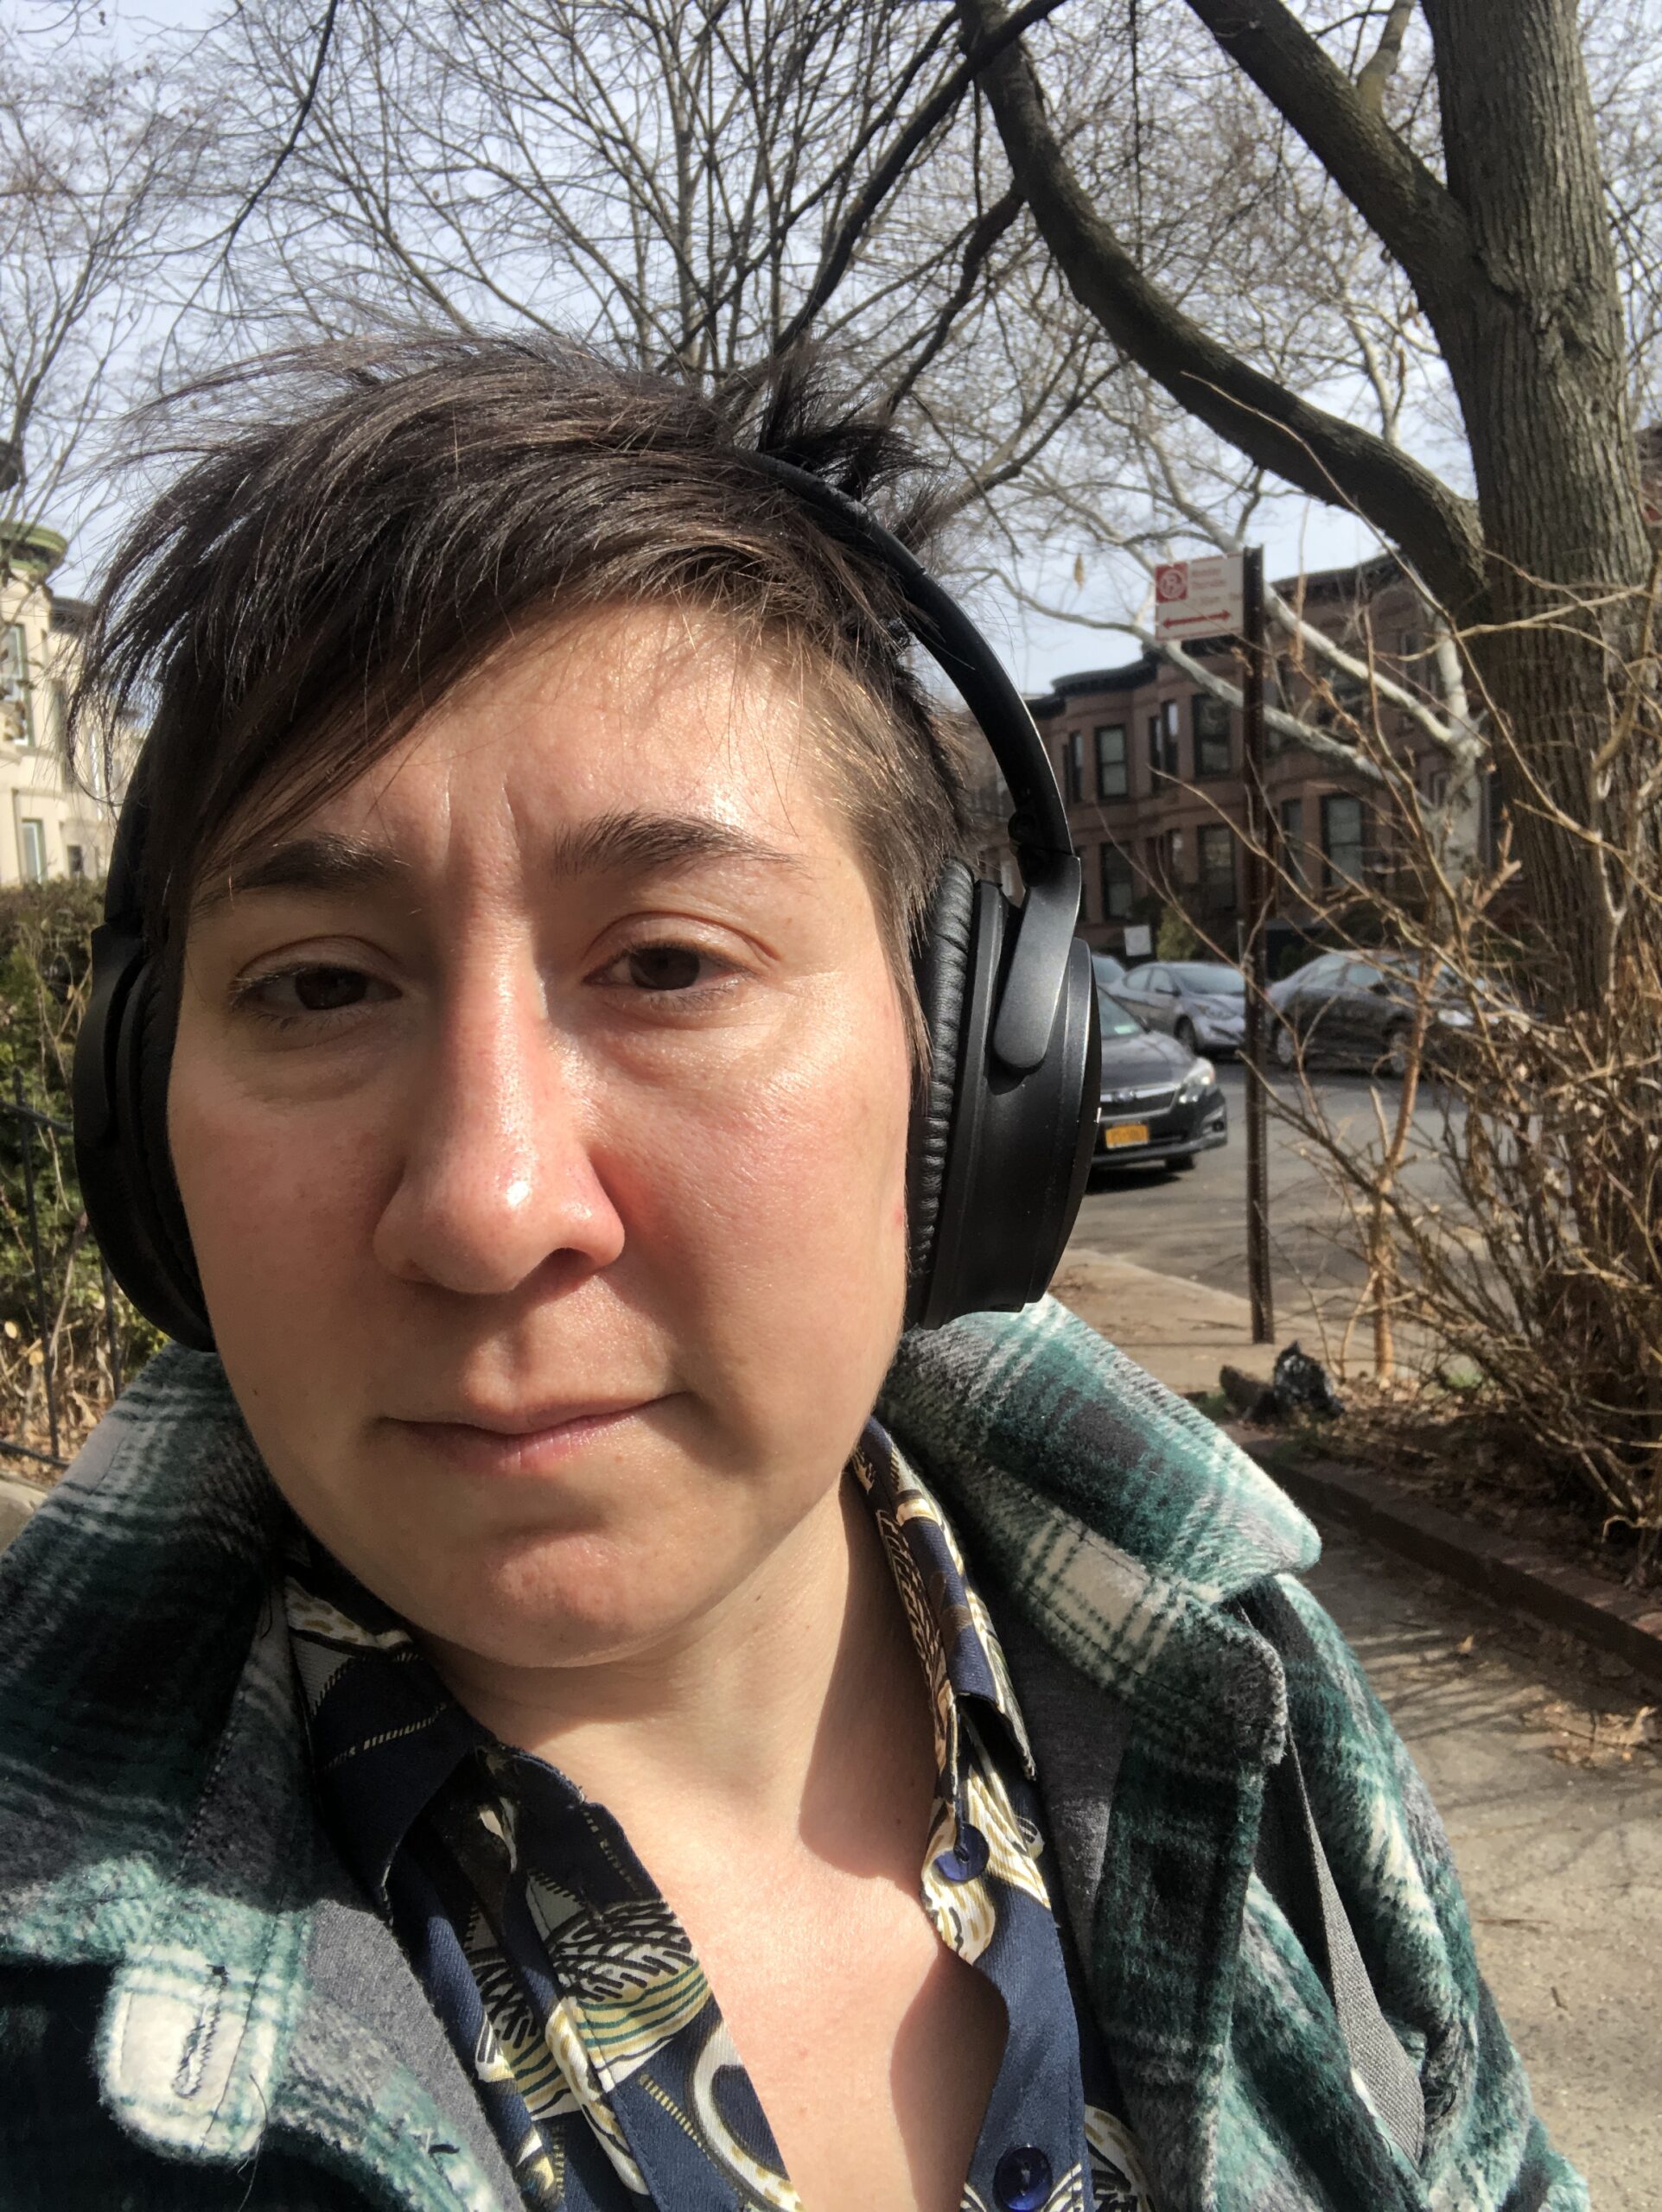 Davida has a slight smile and is wearing headphones on a winter's day.